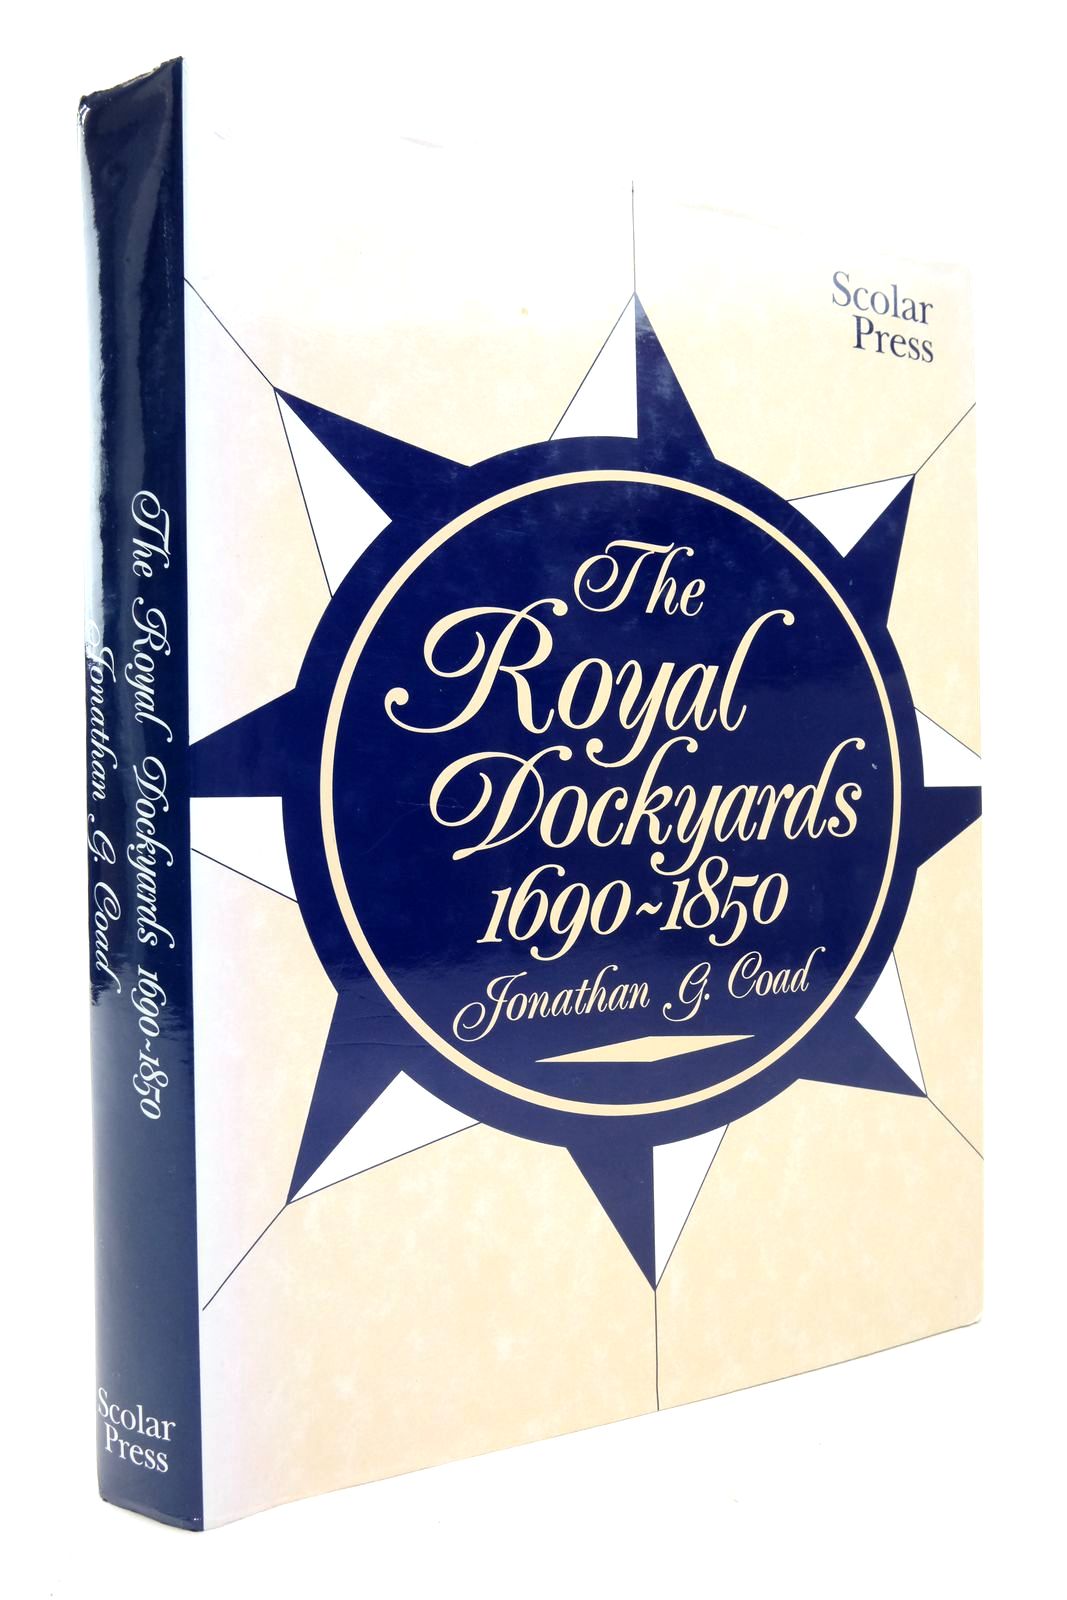 Photo of THE ROYAL DOCKYARDS 1690-1850: ARCHITECTURE AND ENGINEERING WORKS OF THE SAILING NAVY written by Coad, Jonathan published by Scolar Press (STOCK CODE: 2136651)  for sale by Stella & Rose's Books